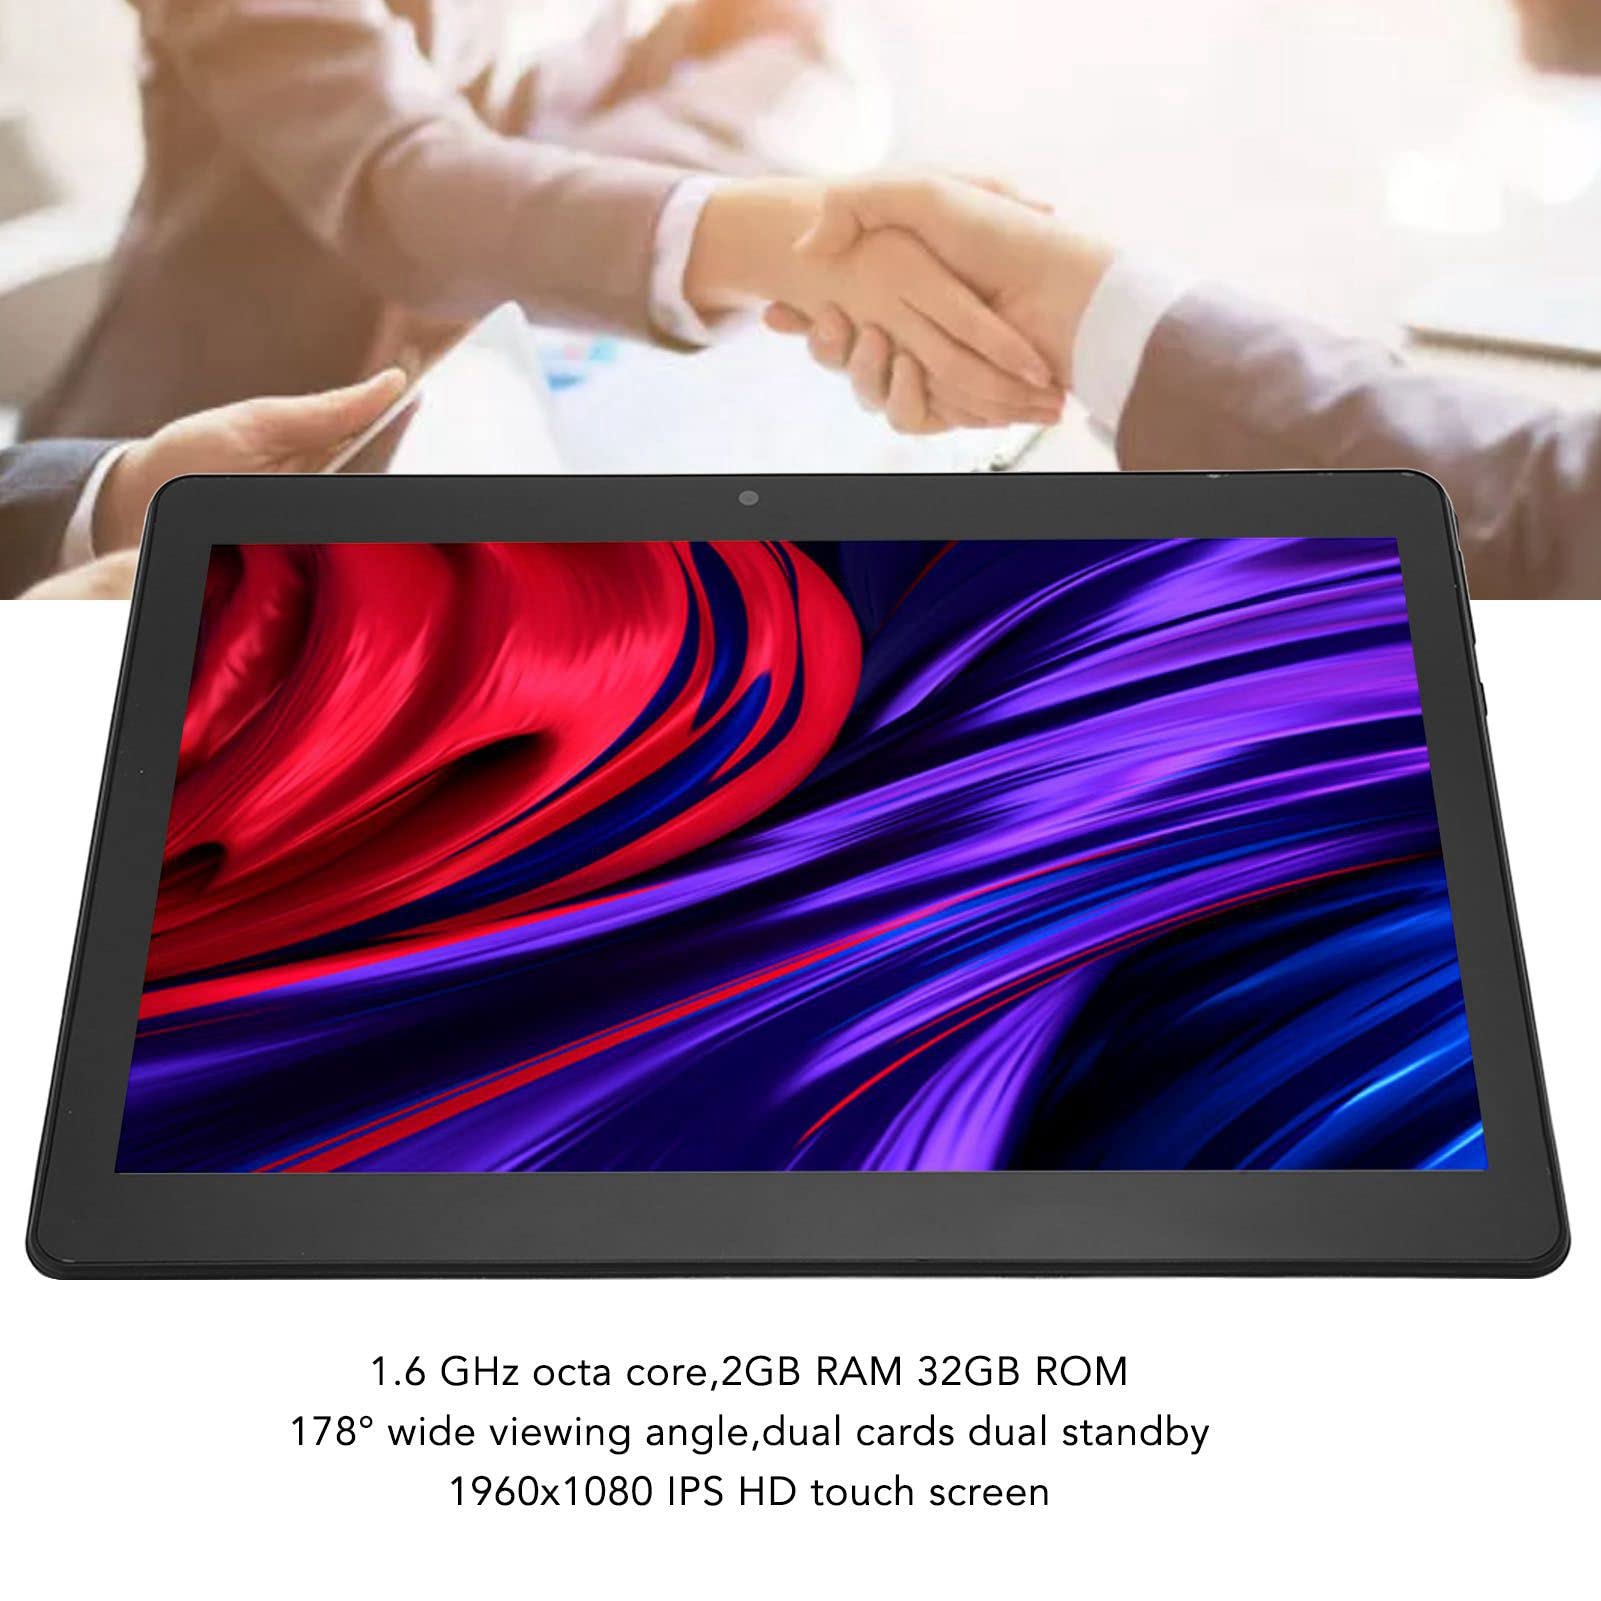 10 Inch Tablet, 1960X1080 IPS HD Touch Screen, 2 and 32GB Memory, Octa Core Processor, Front 2 MP and Rear 5 MP Cameras, Calling Tablet for Android 11 OS(USA)